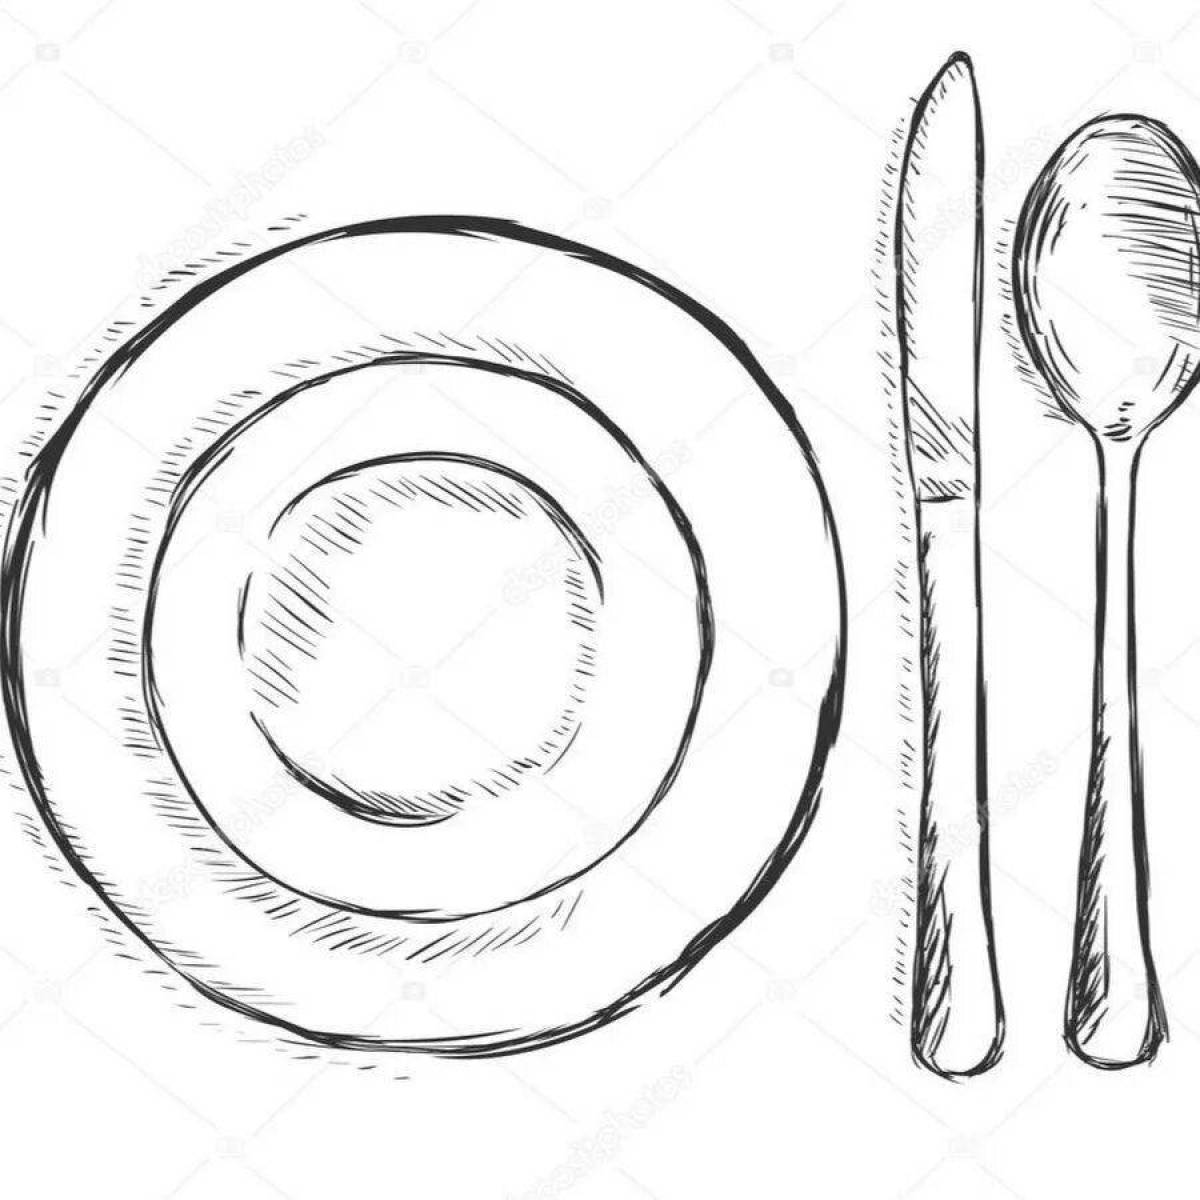 Fun table setting coloring book for kids